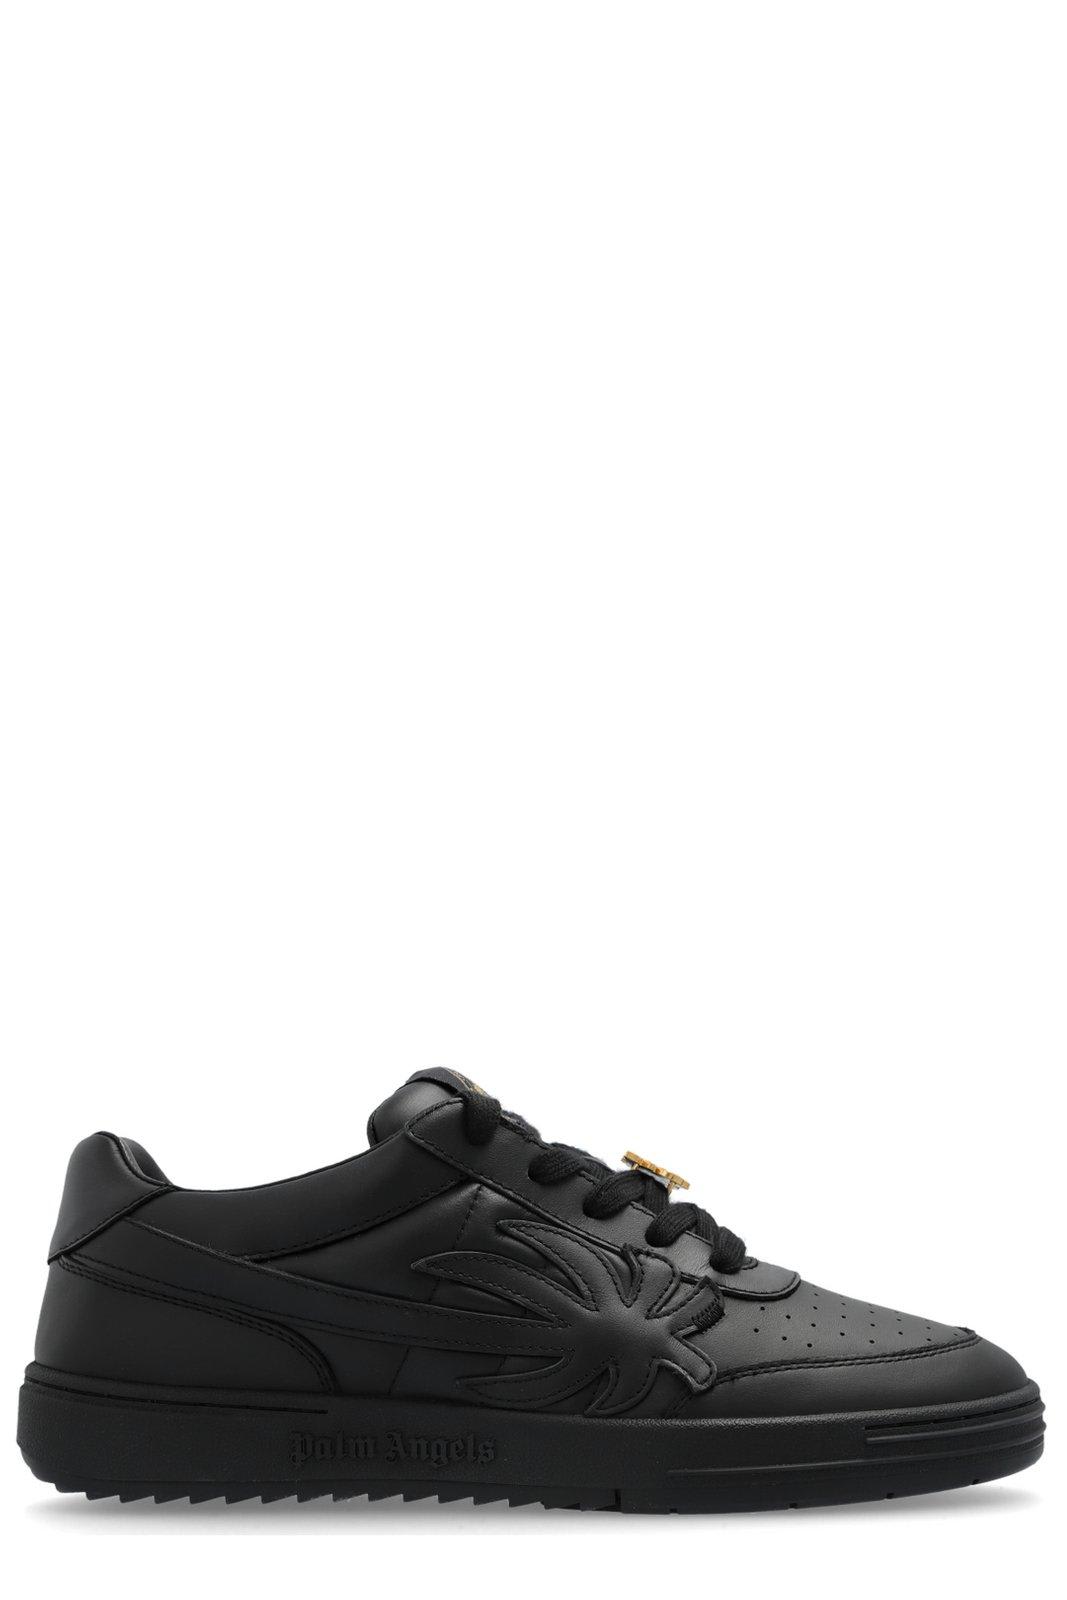 Palm Angels Palm Beach University Low-top Trainers In Black